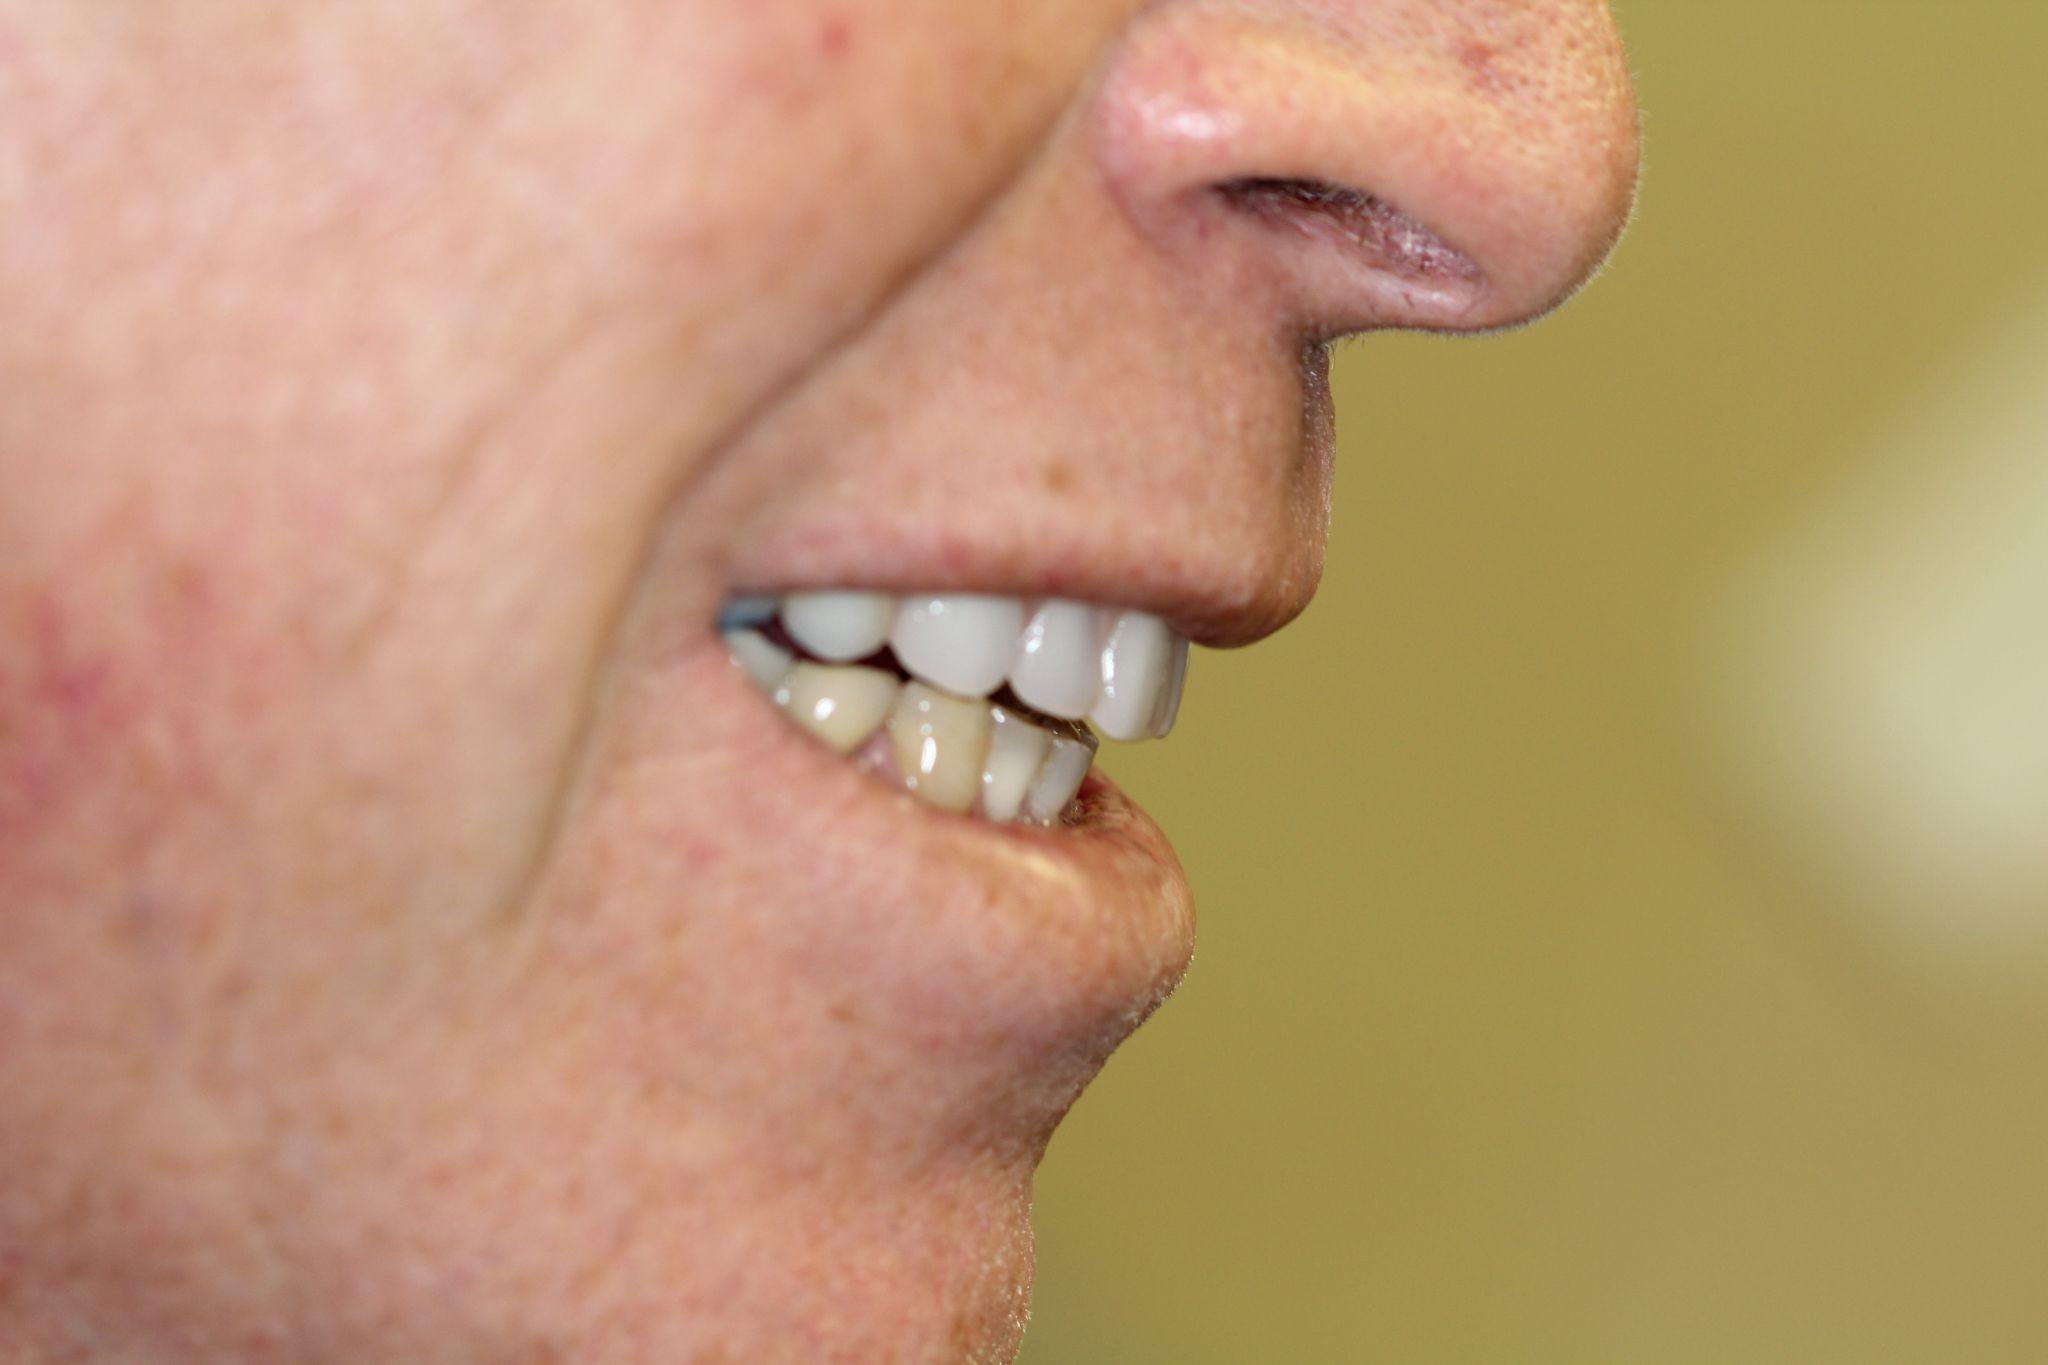 A man smiling with his teeth showing